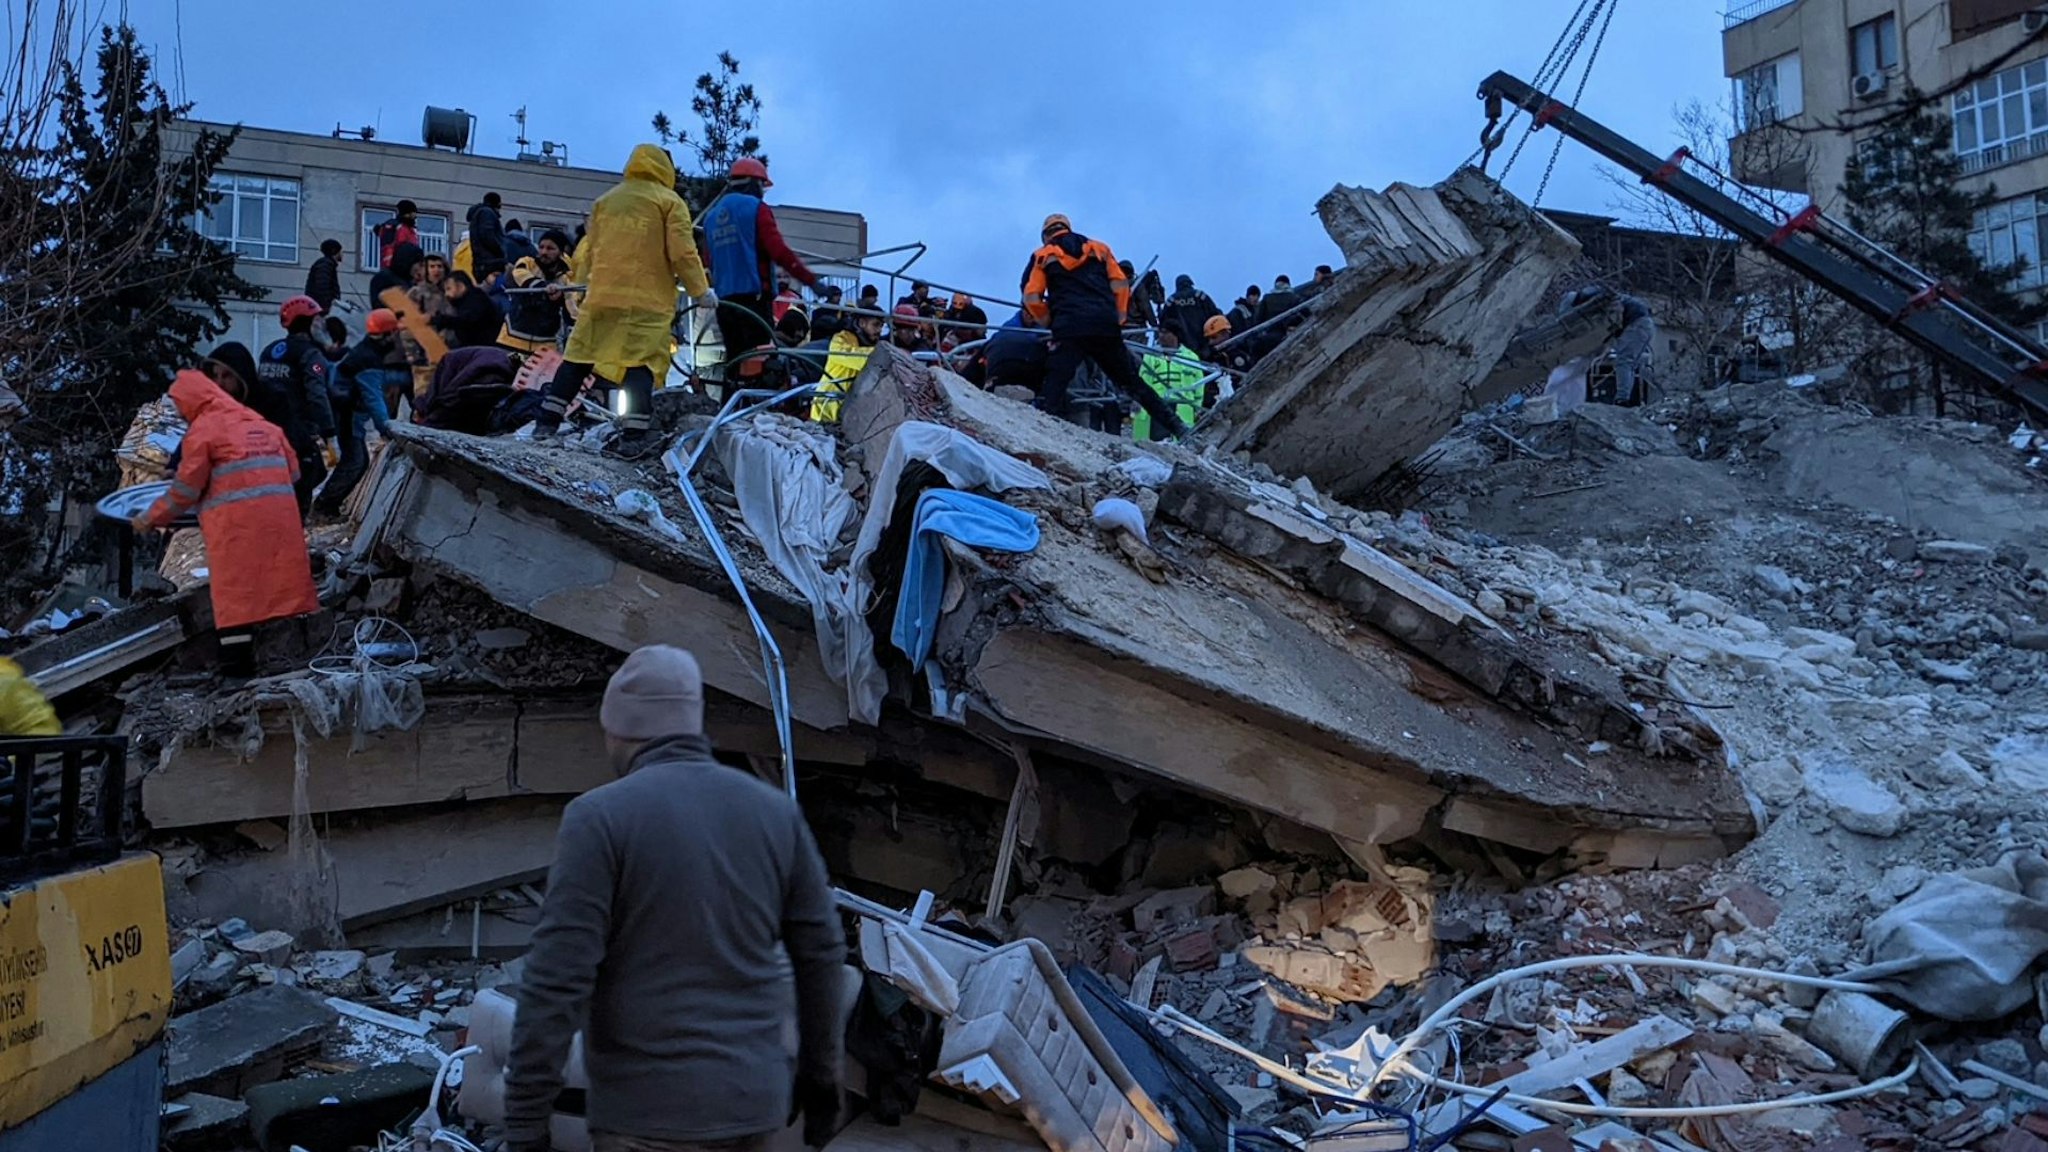 Rescue workers and volunteers search for survivors in the rubble of a collasped building, in Sanliurfa, Turkey, on February 6, 2023, after a 7.8-magnitude earthquake struck the country's south-east. - The combined death toll has risen to over 2,300 for Turkey and Syria after the region's strongest quake in nearly a century. Turkey's emergency services said at least 1,121 people died in the earthquake, with another 783 confirmed fatalities in Syria.